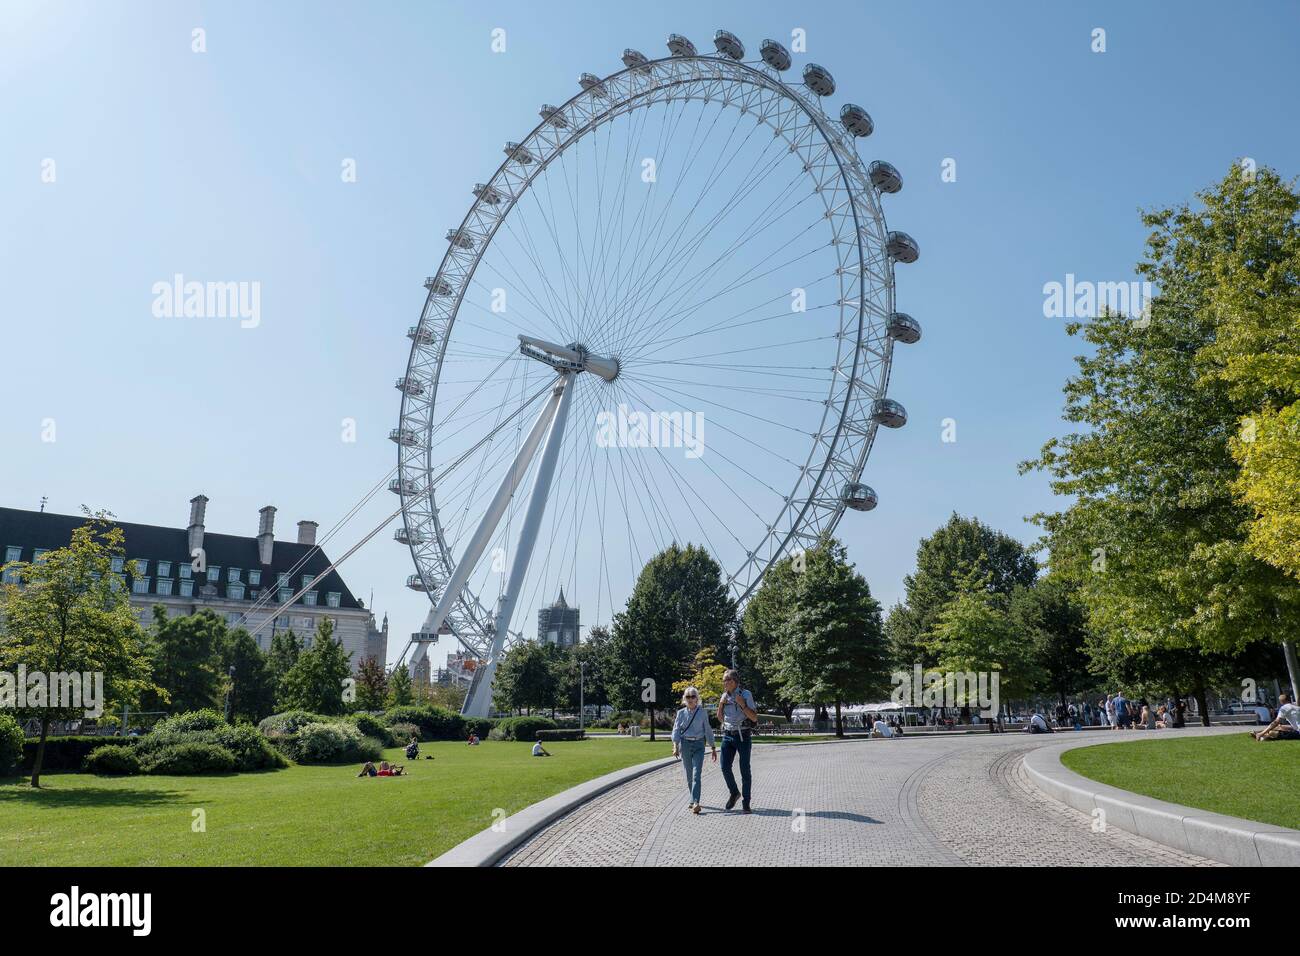 The London Eye at the Jubilee Park and Garden on the 14th September 2020 on the South Bank in the United Kingdom. Photo by Sam Mellish Stock Photo